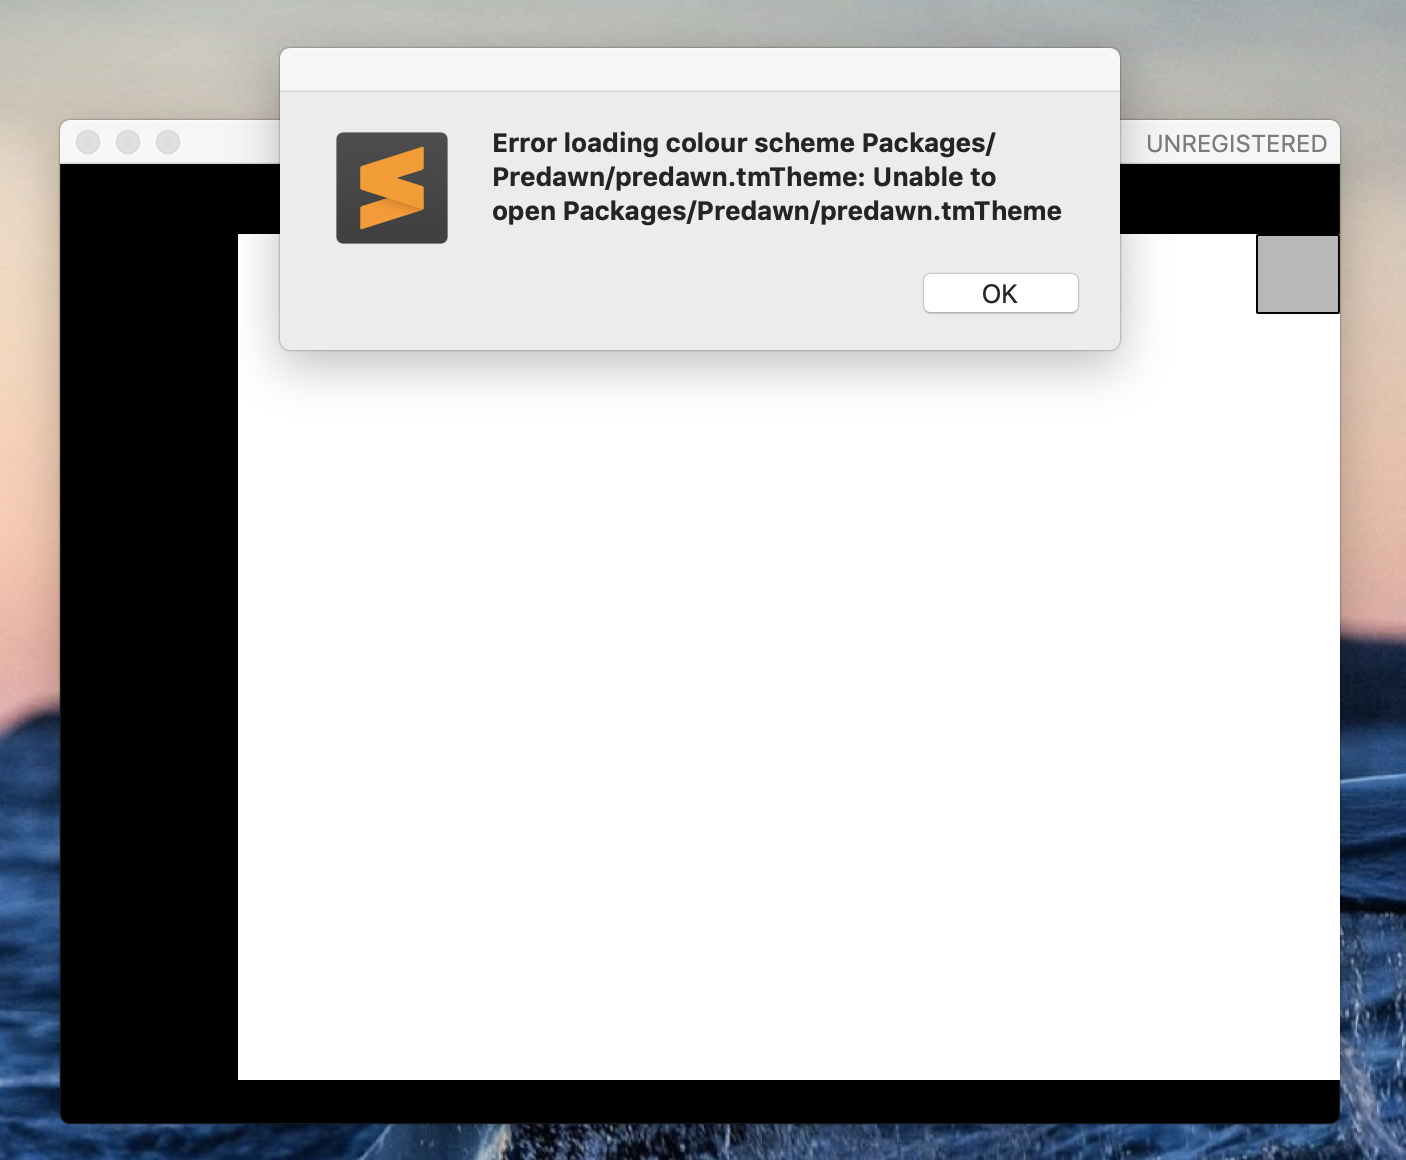 sublime text 4 for mac